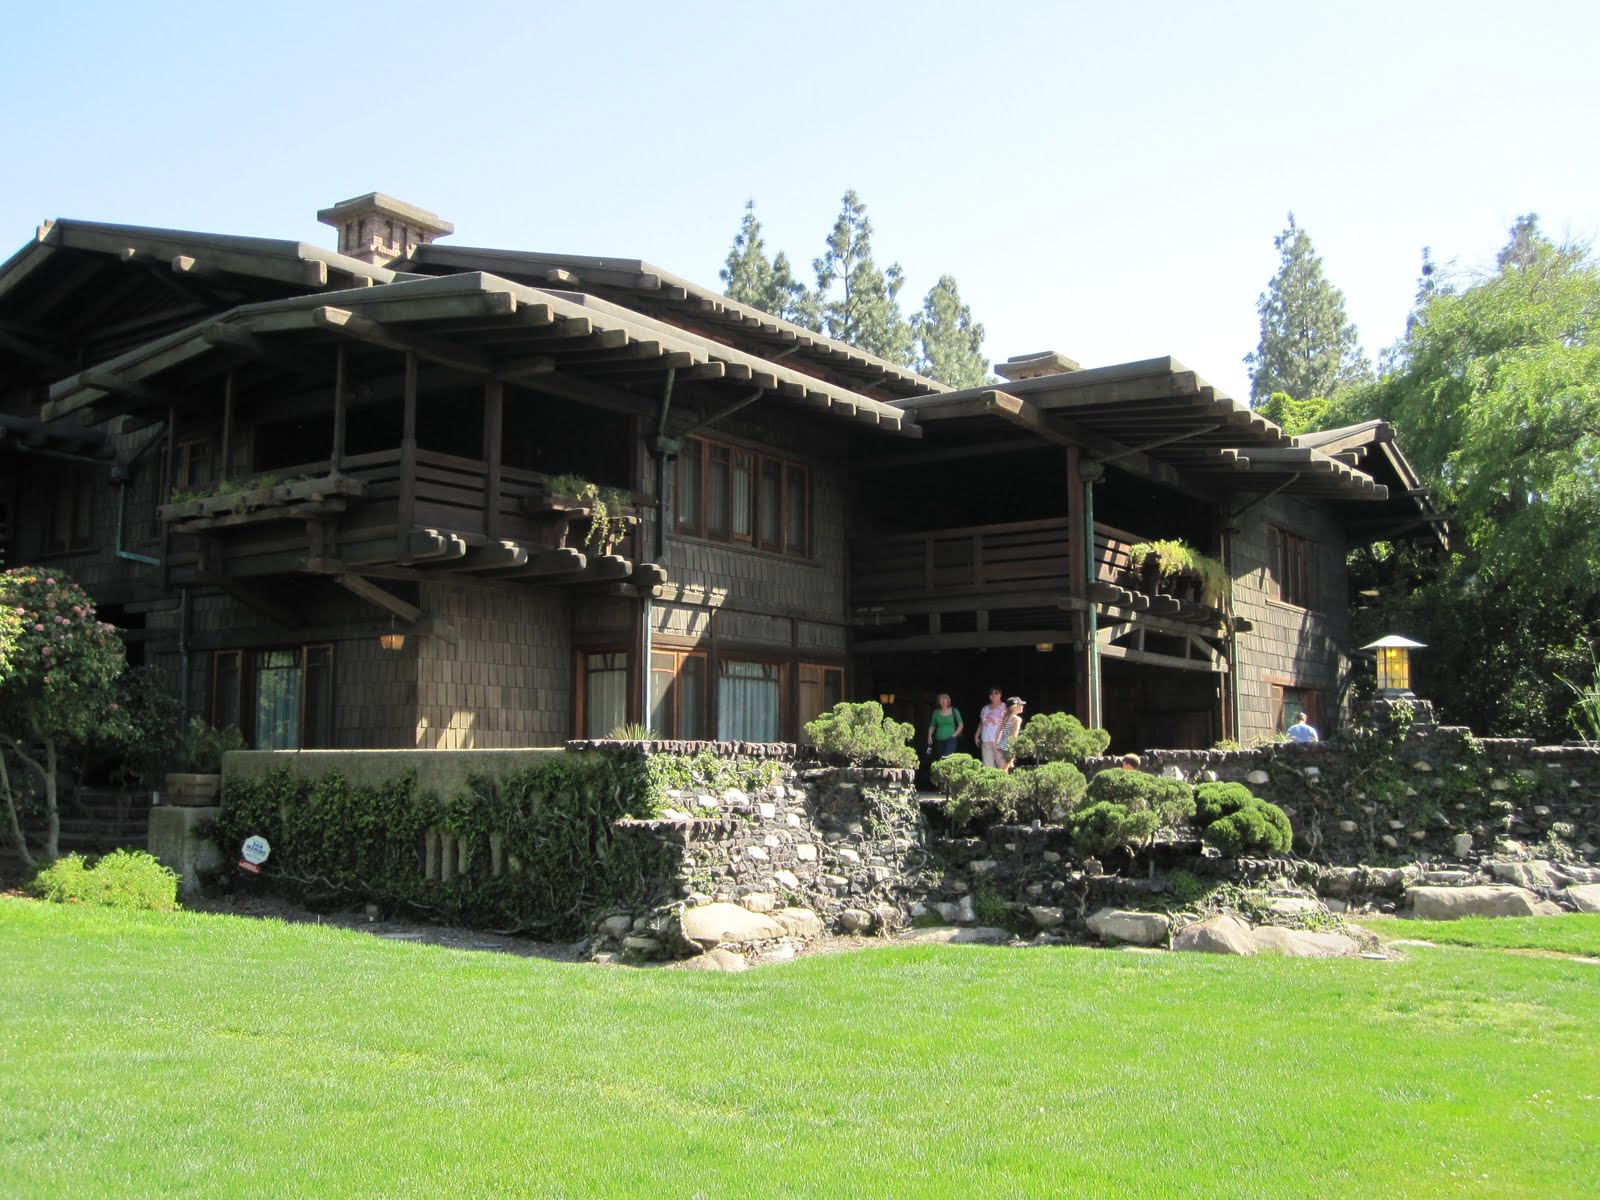  Chris Howe Realty: American Arts and Crafts Style - The Gamble House